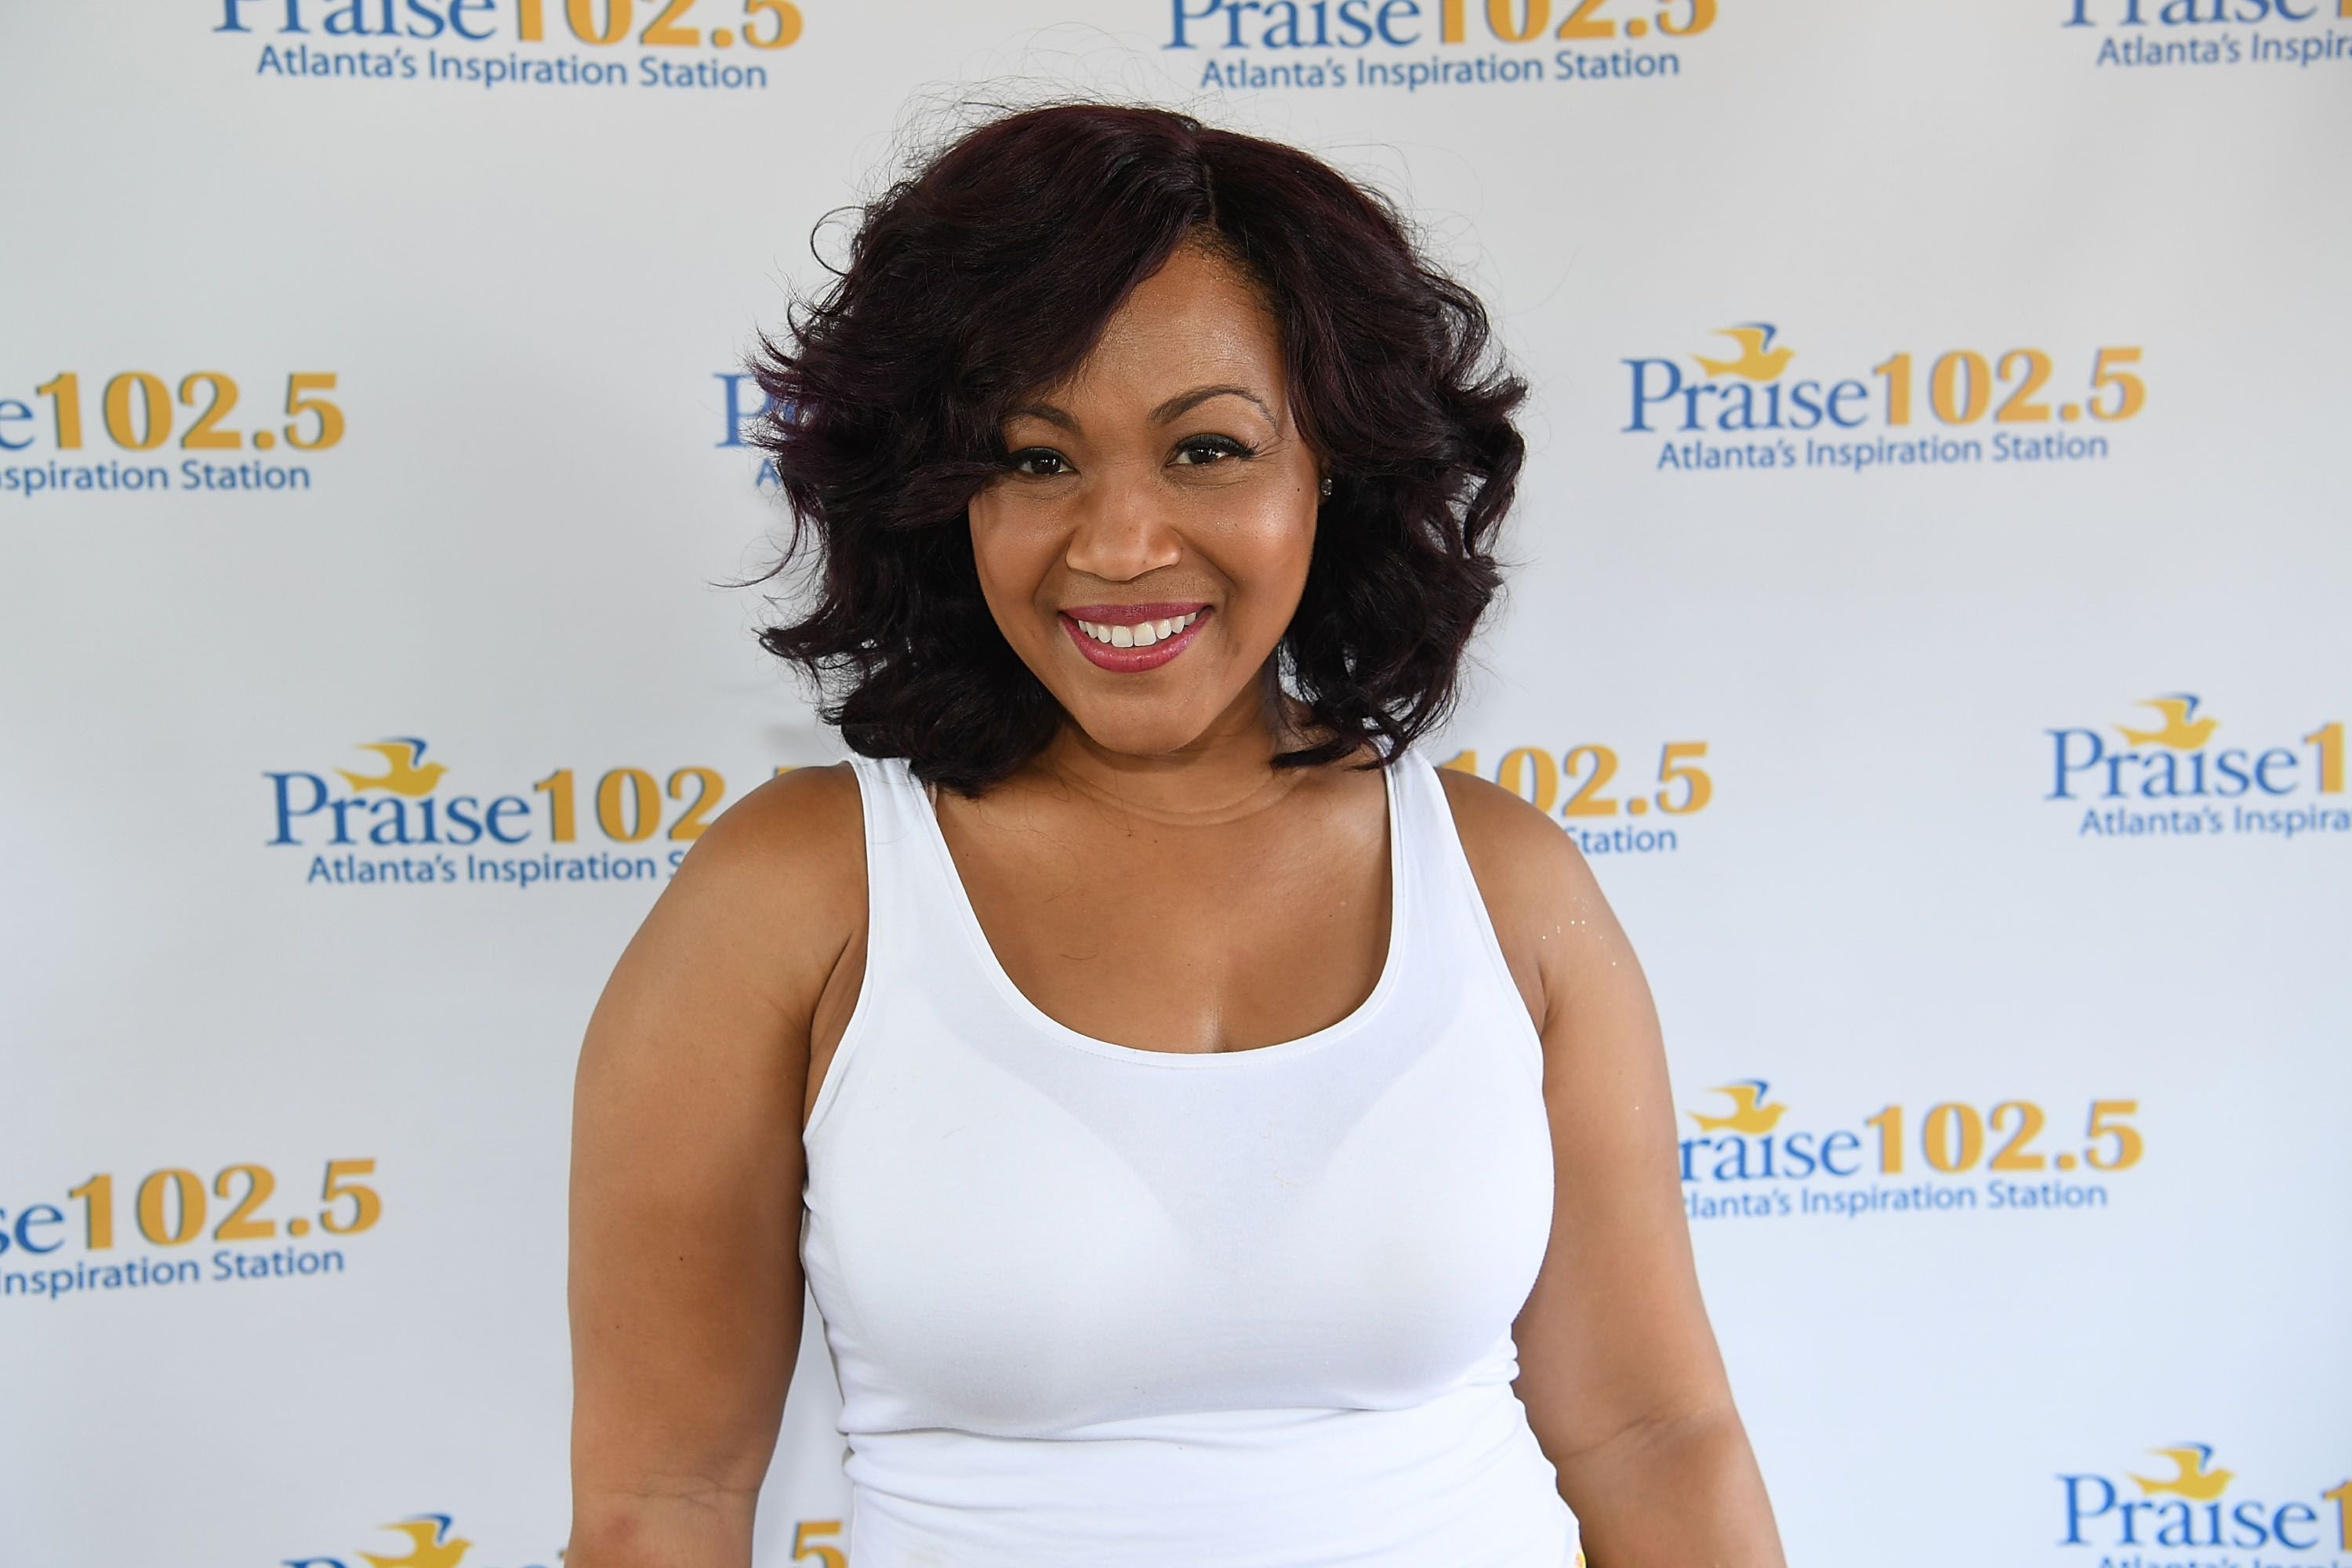 Erica Campbell at the Praise 102.5's "Praise In The Park" at the Centennial Olympic Park on August 6, 2016 in Atlanta, Georgia. | Source: Getty Images